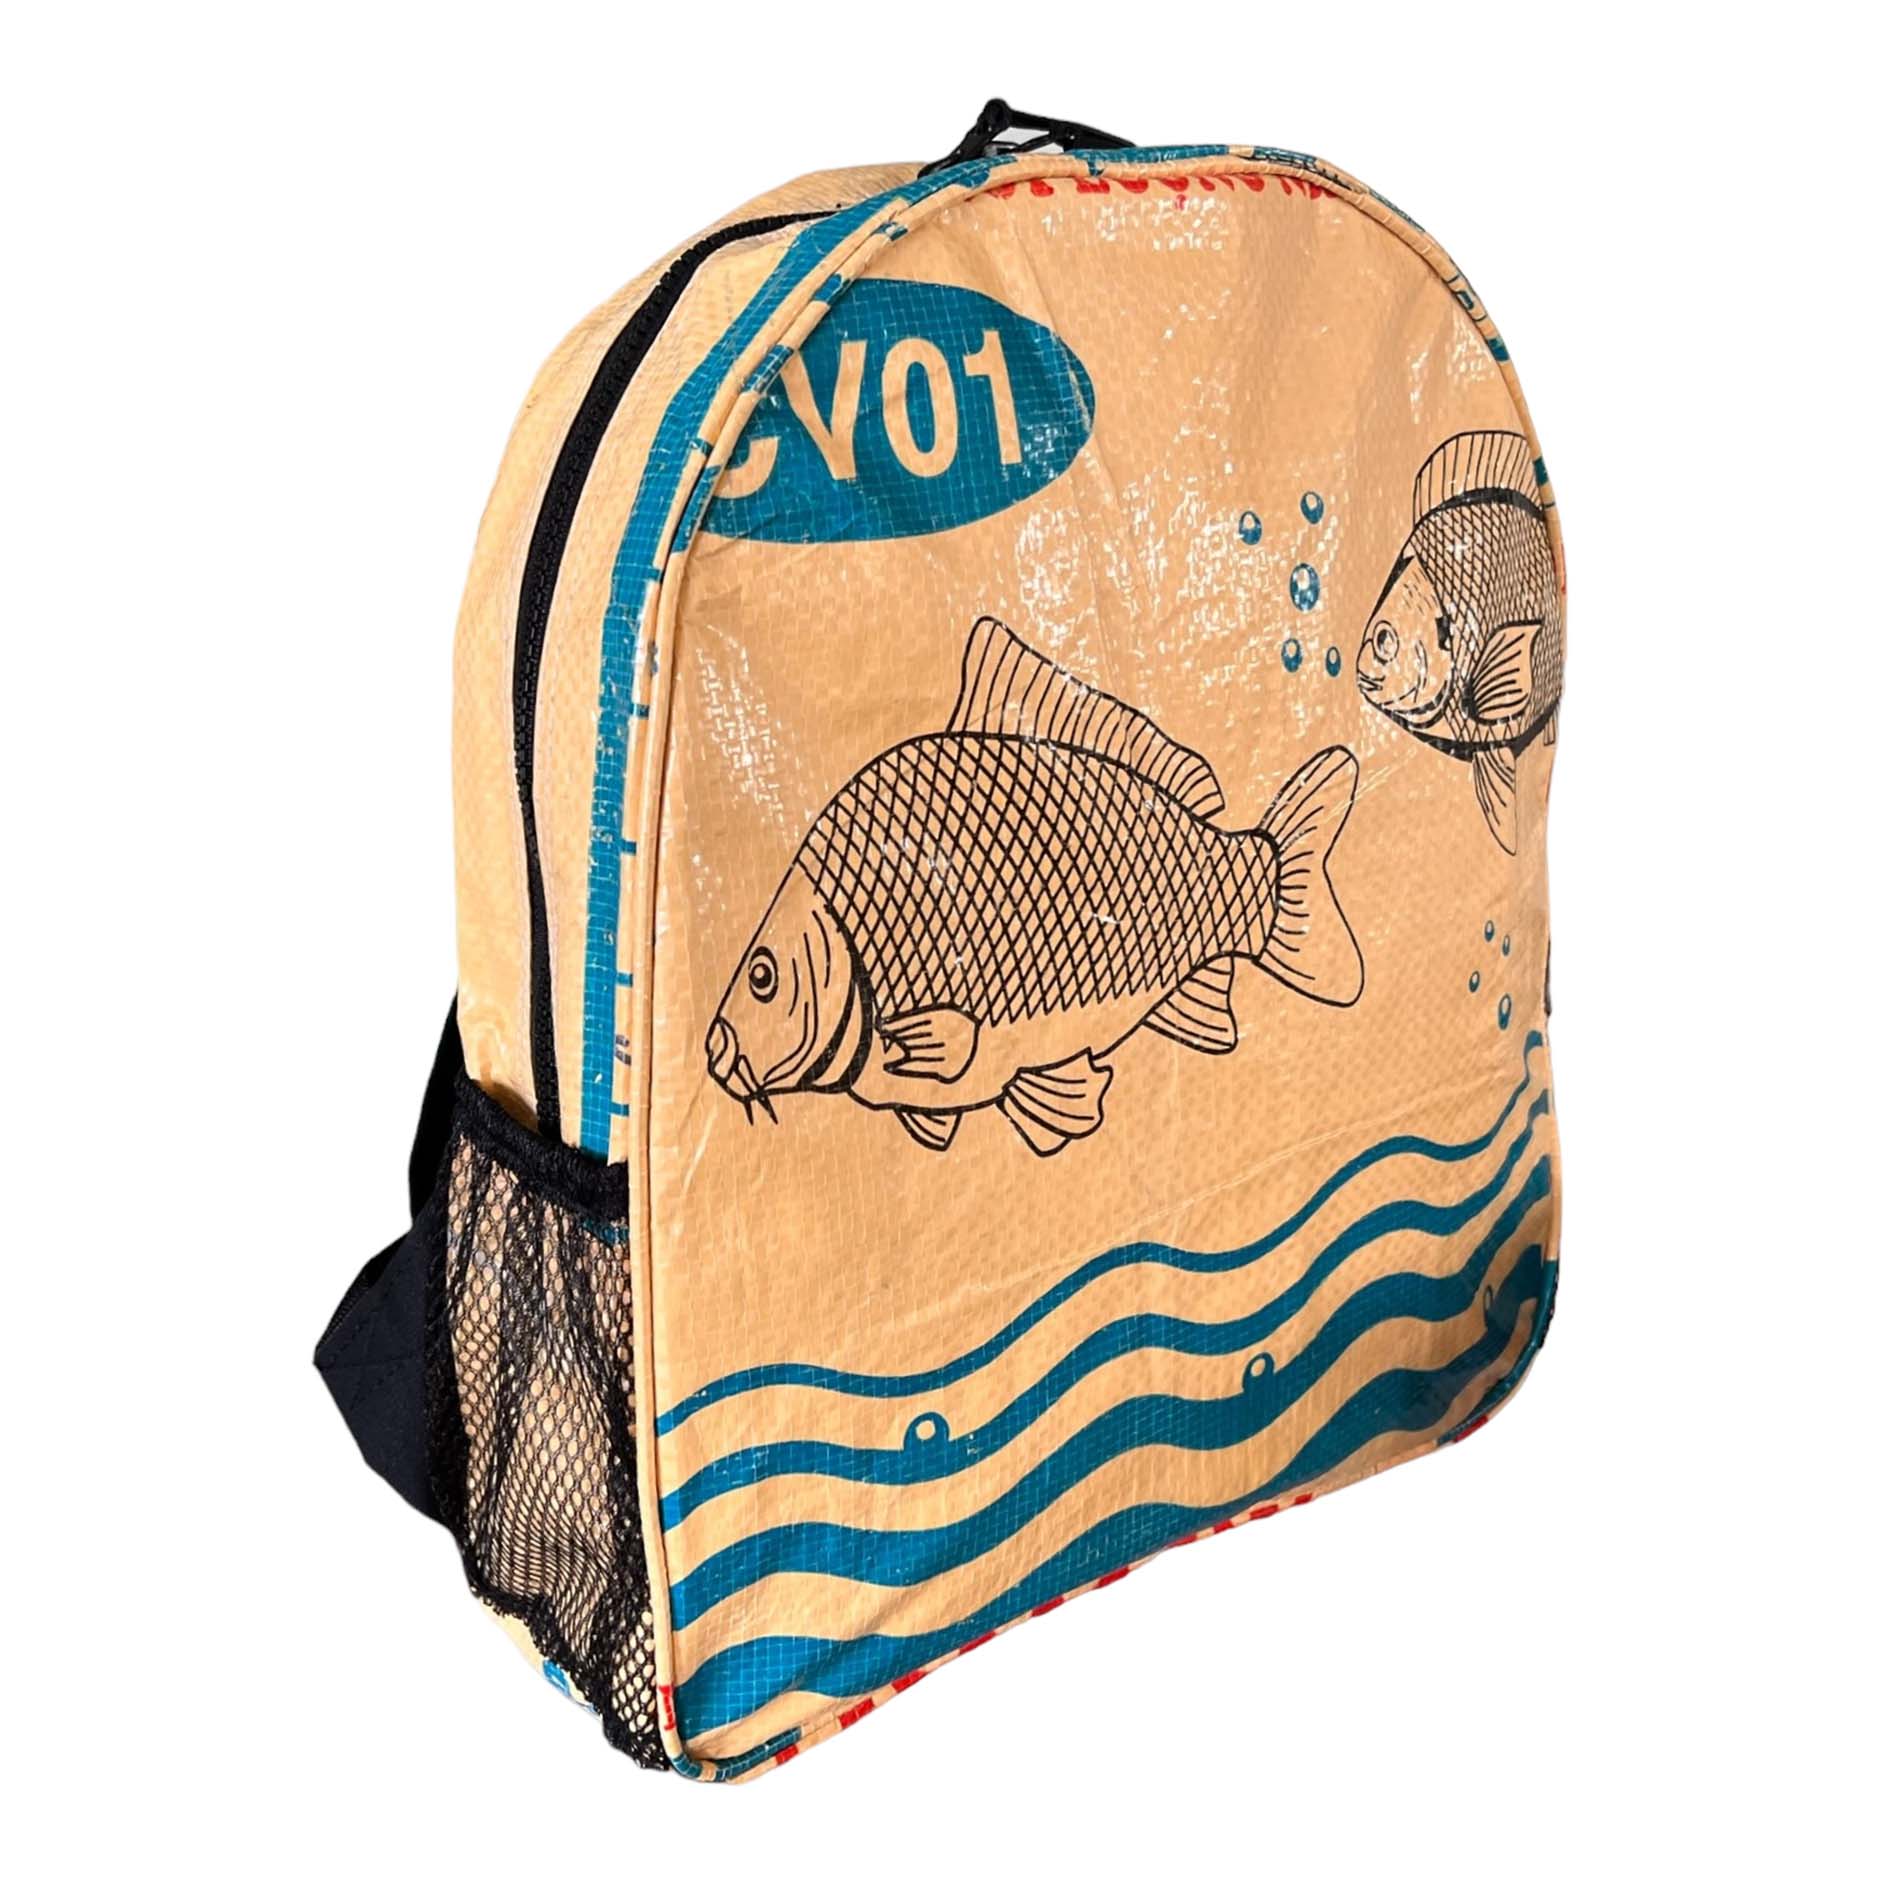 Small backpacks with fish prints